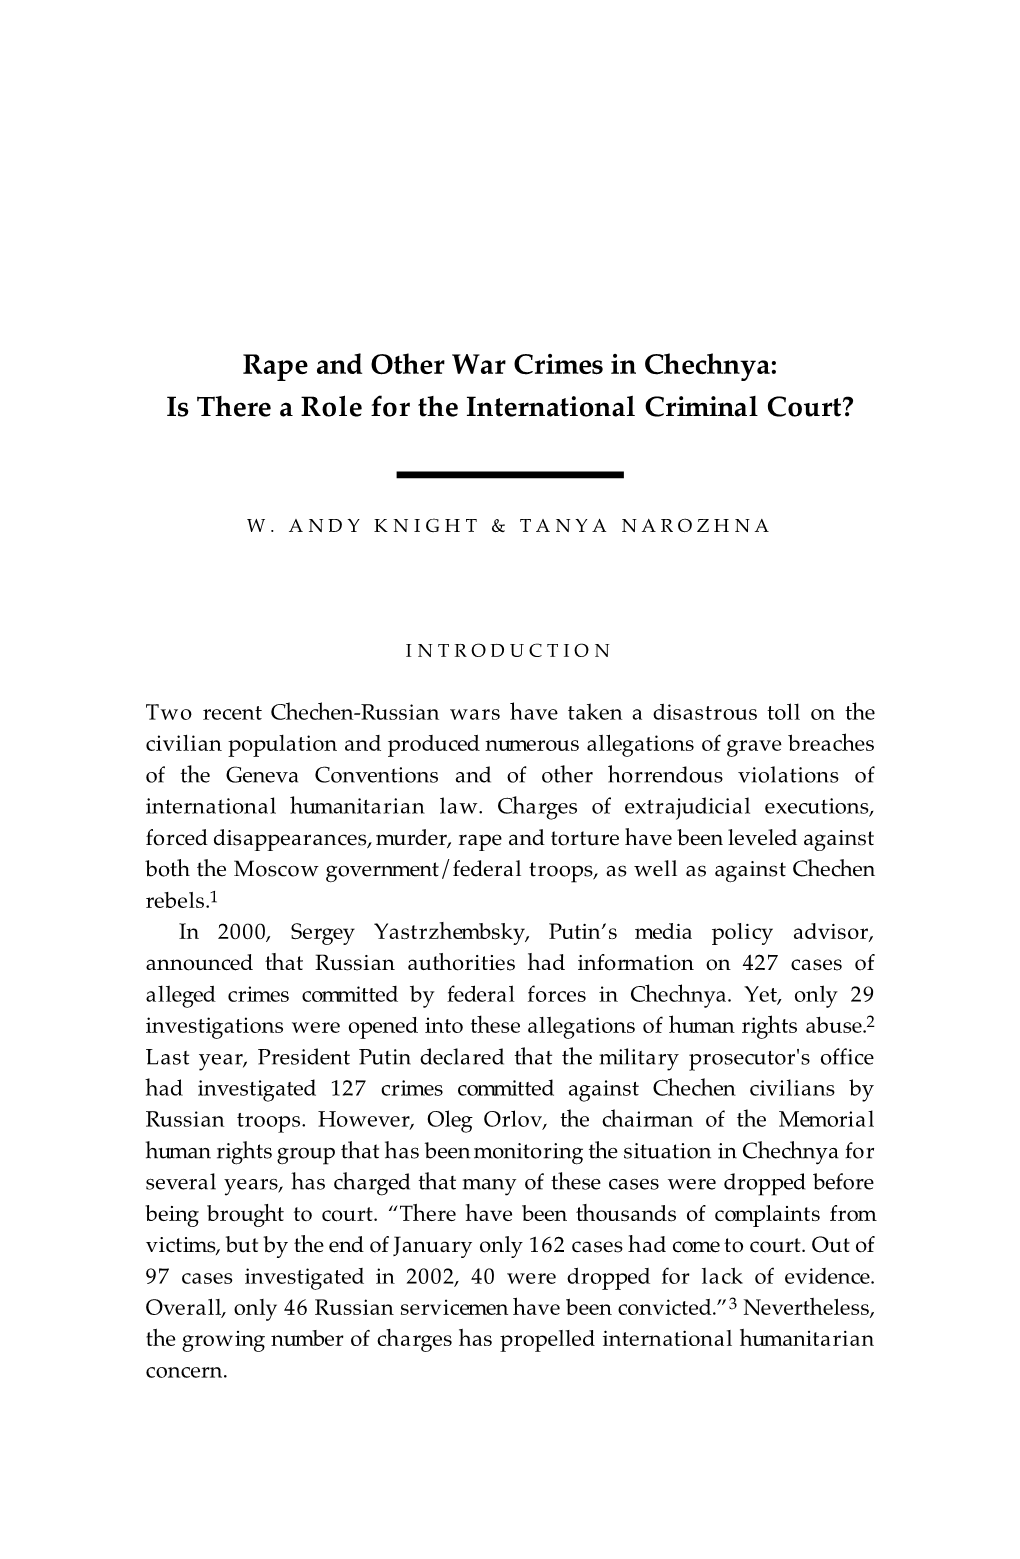 Rape and Other War Crimes in Chechnya: Is There a Role for the International Criminal Court?